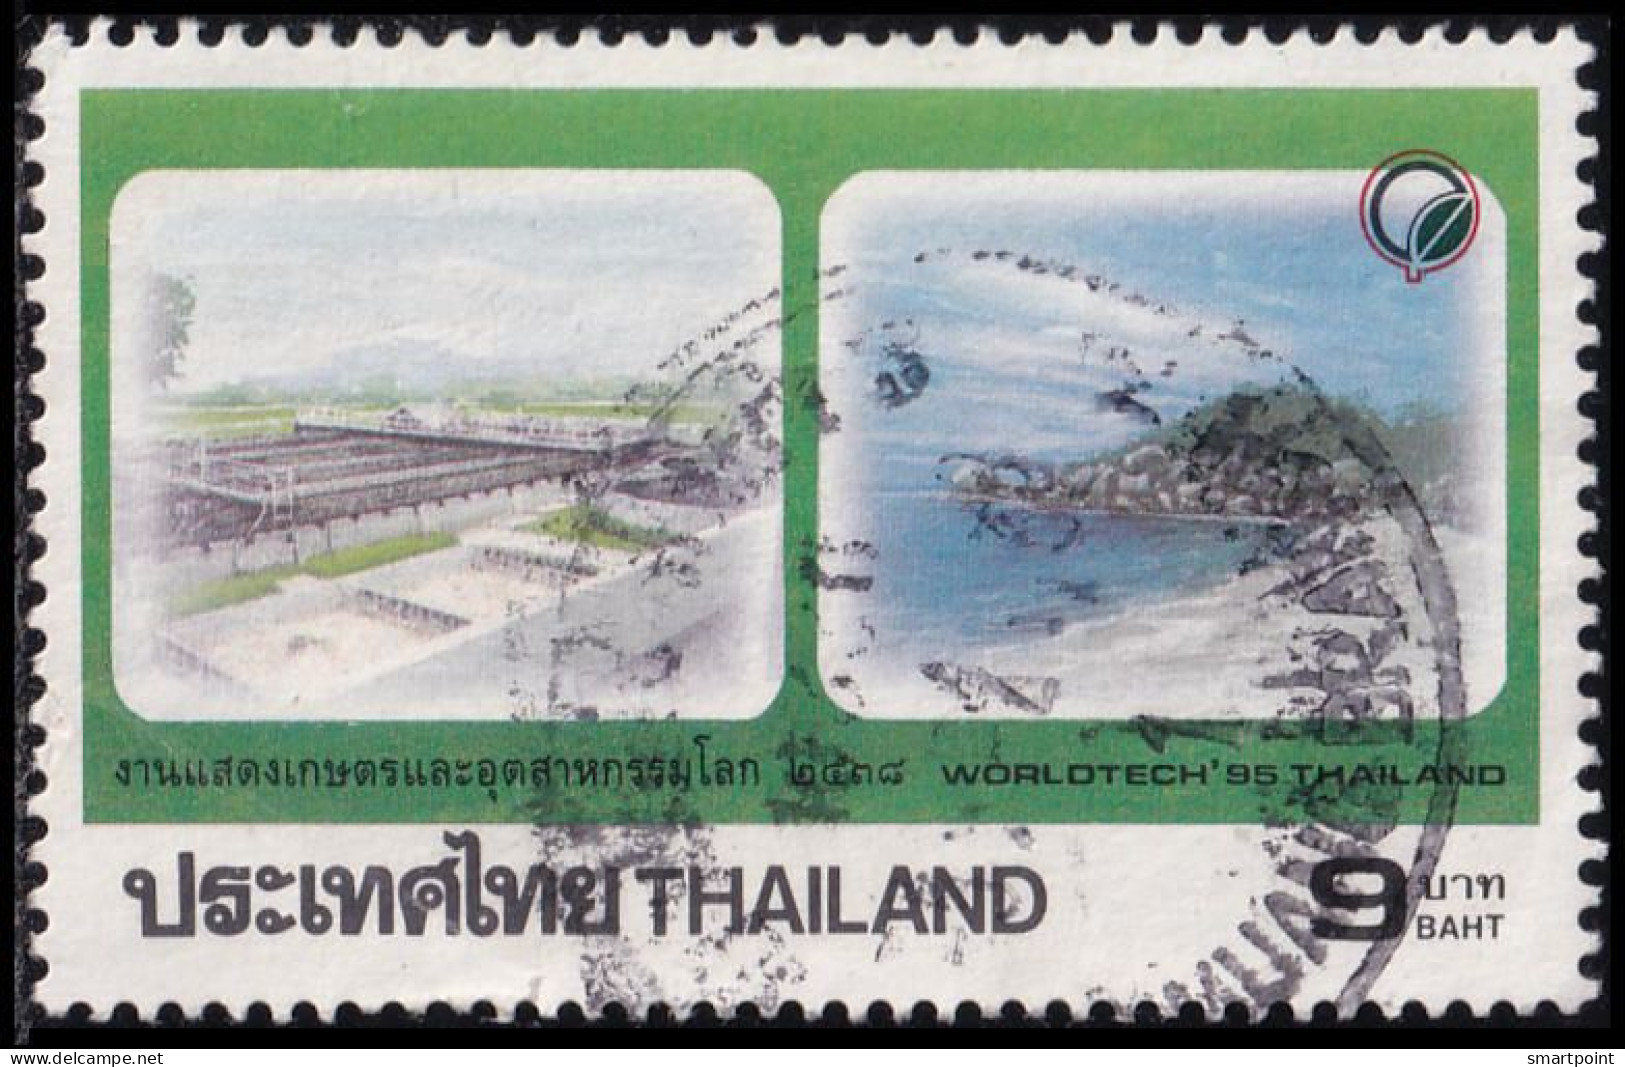 Thailand Stamp 1995 World Agricultural And Industrial Exhibition 9 Baht - Used - Thaïlande